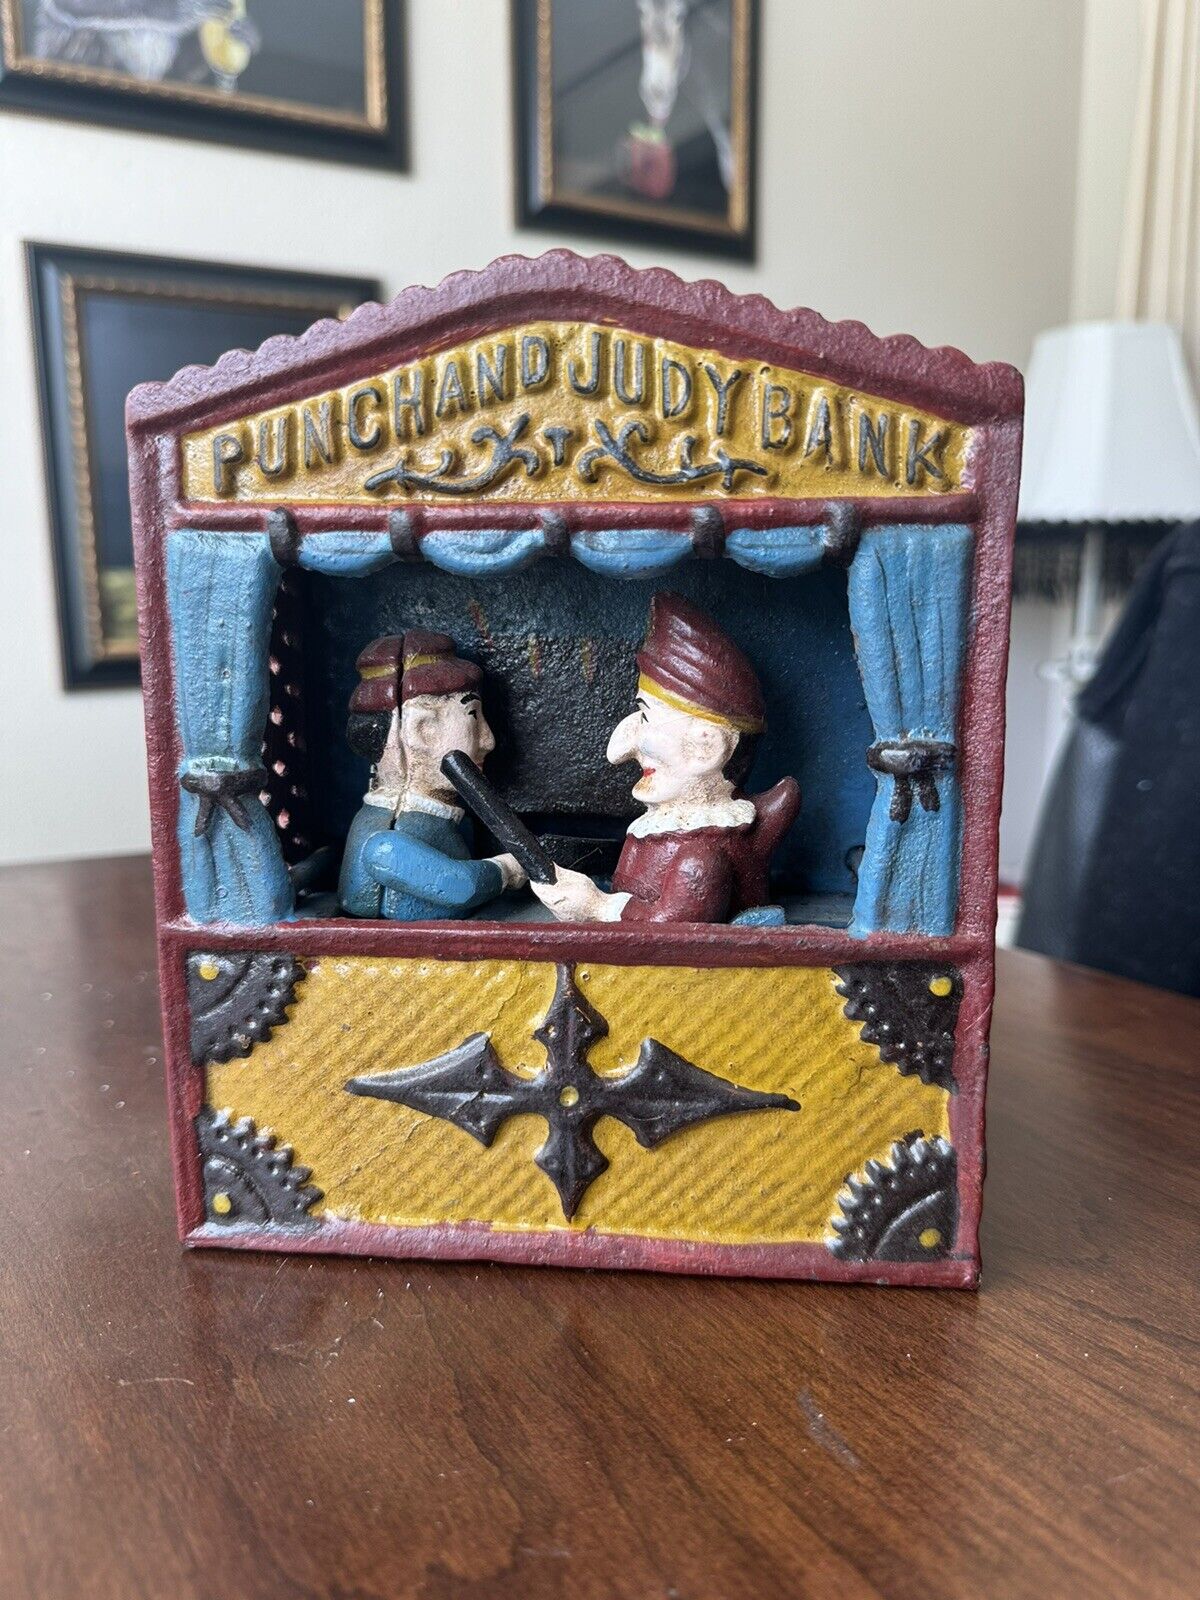 Vintage Punch & Judy Cast Iron Bank Book Of Knowledge Works Good Condition